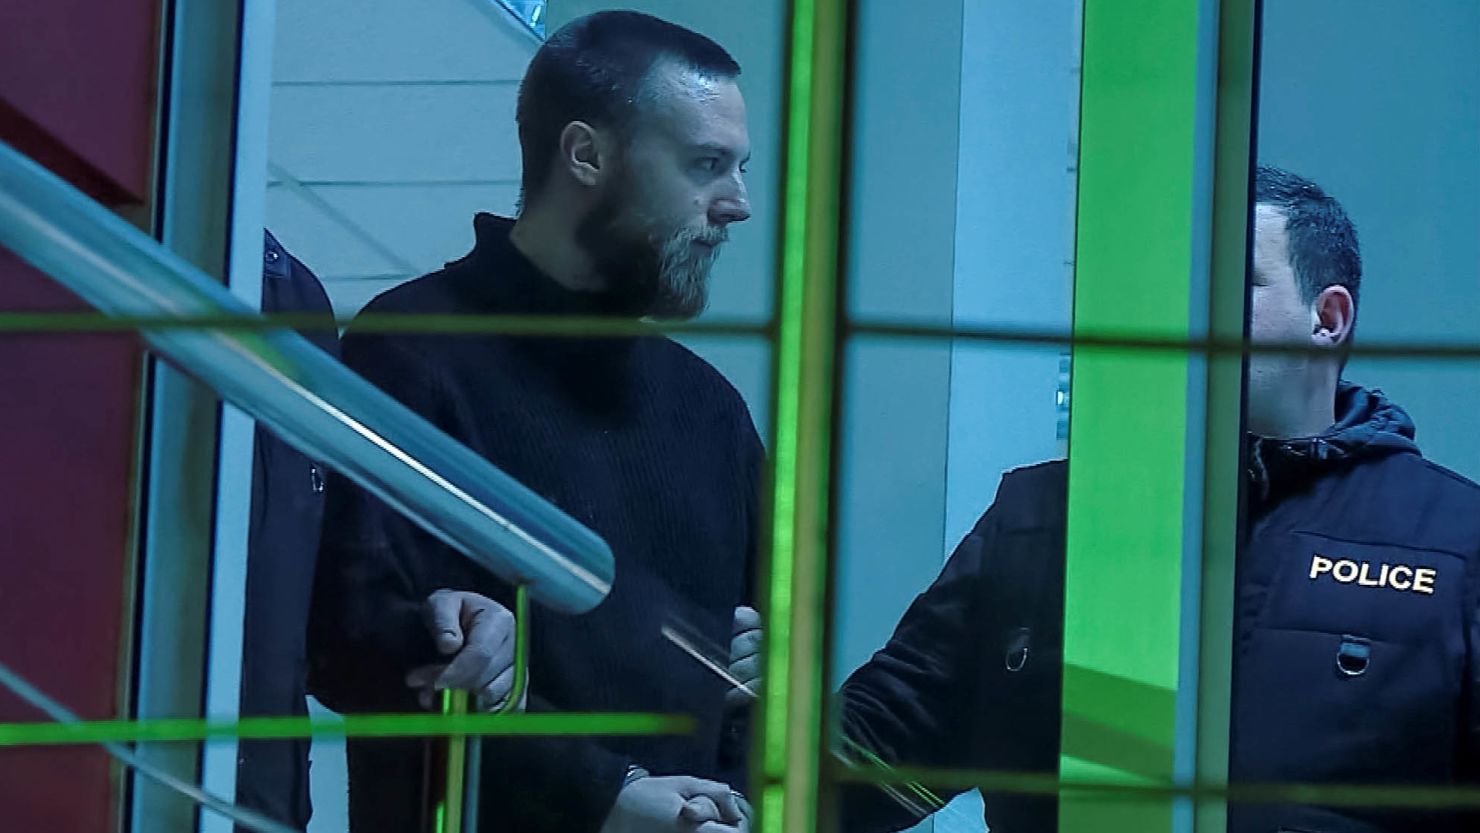 Jack Shepherd is seen being escorted inside a police station in Tbilisi, Georgia, on January 23, 2019.